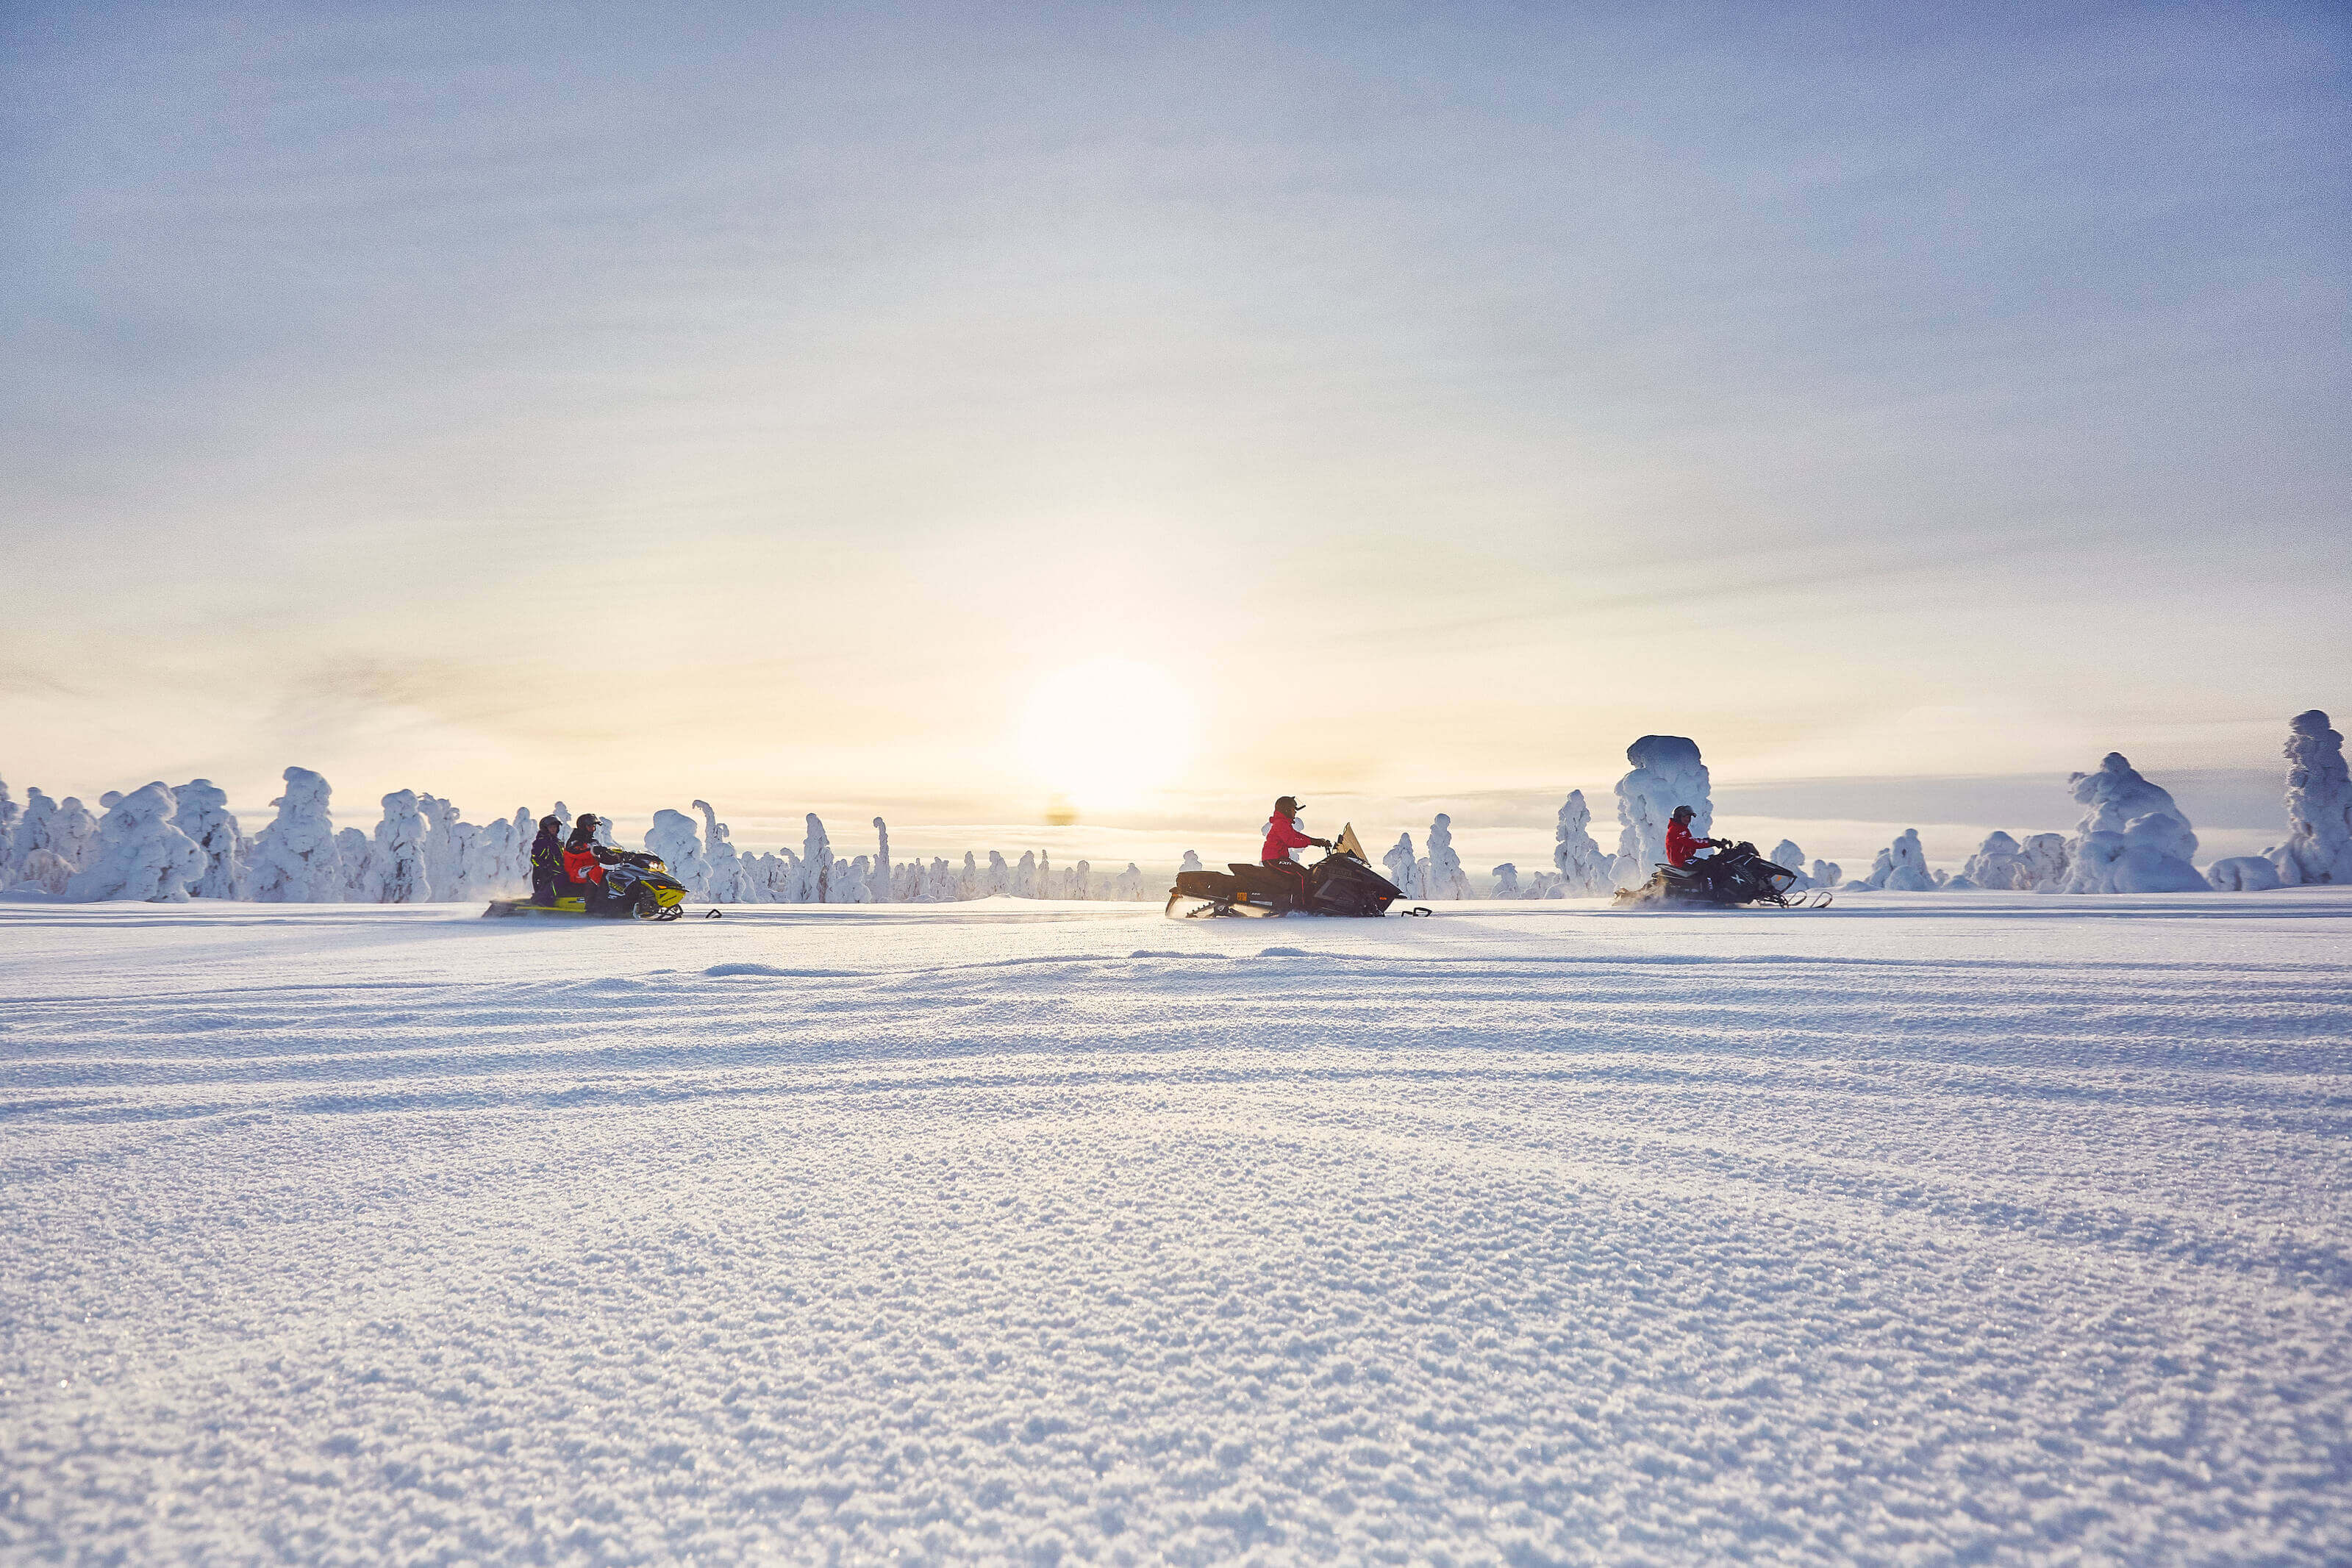 A snowmobile caravan crossing a snow-covered fields in the Finnish Lapland